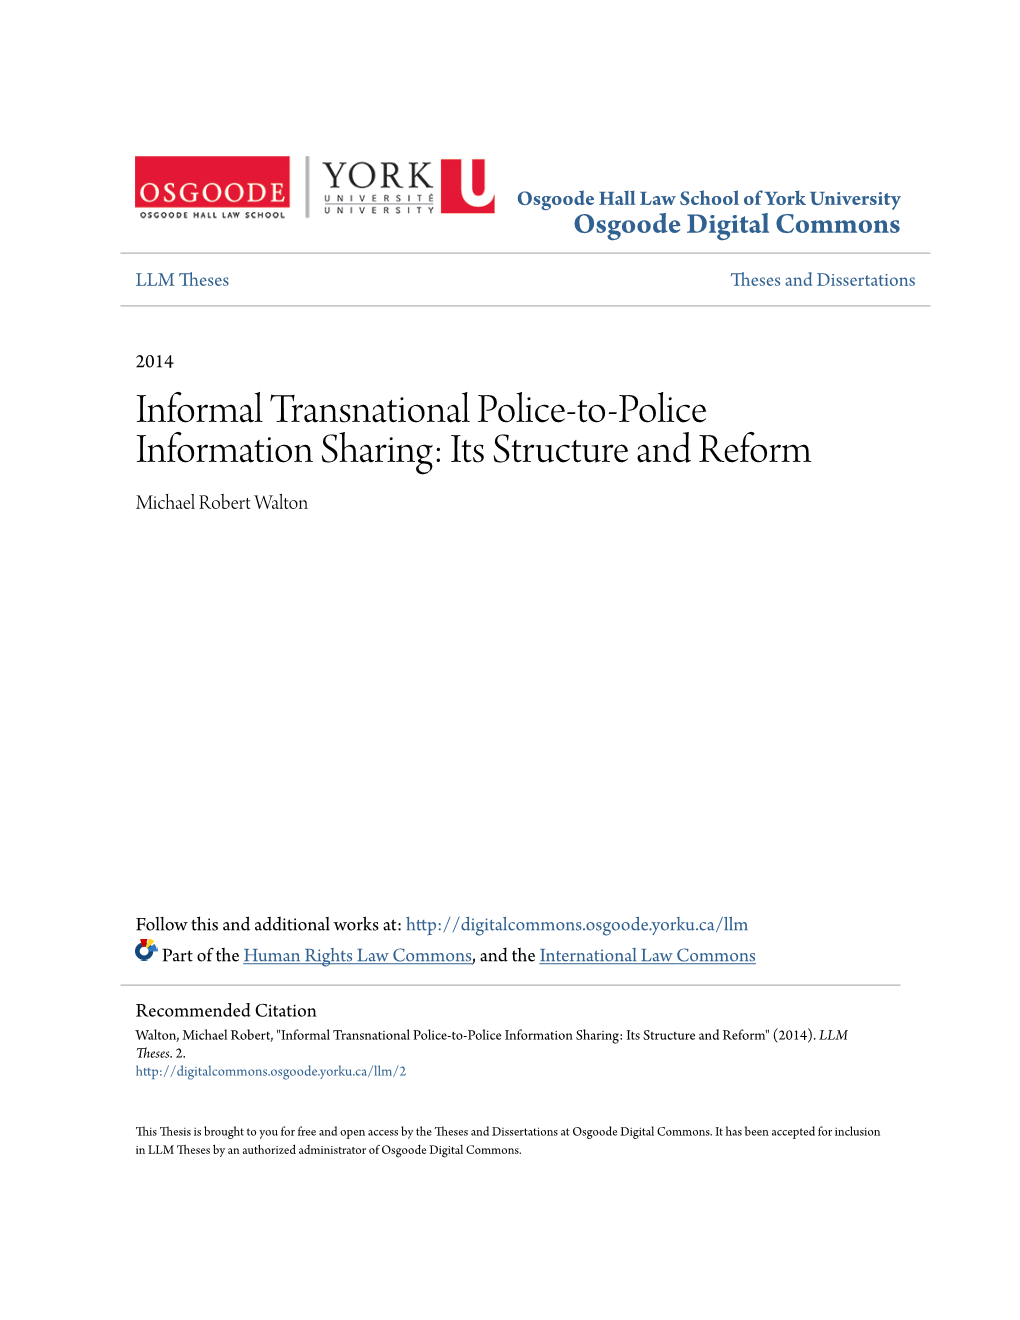 Informal Transnational Police-To-Police Information Sharing: Its Structure and Reform Michael Robert Walton